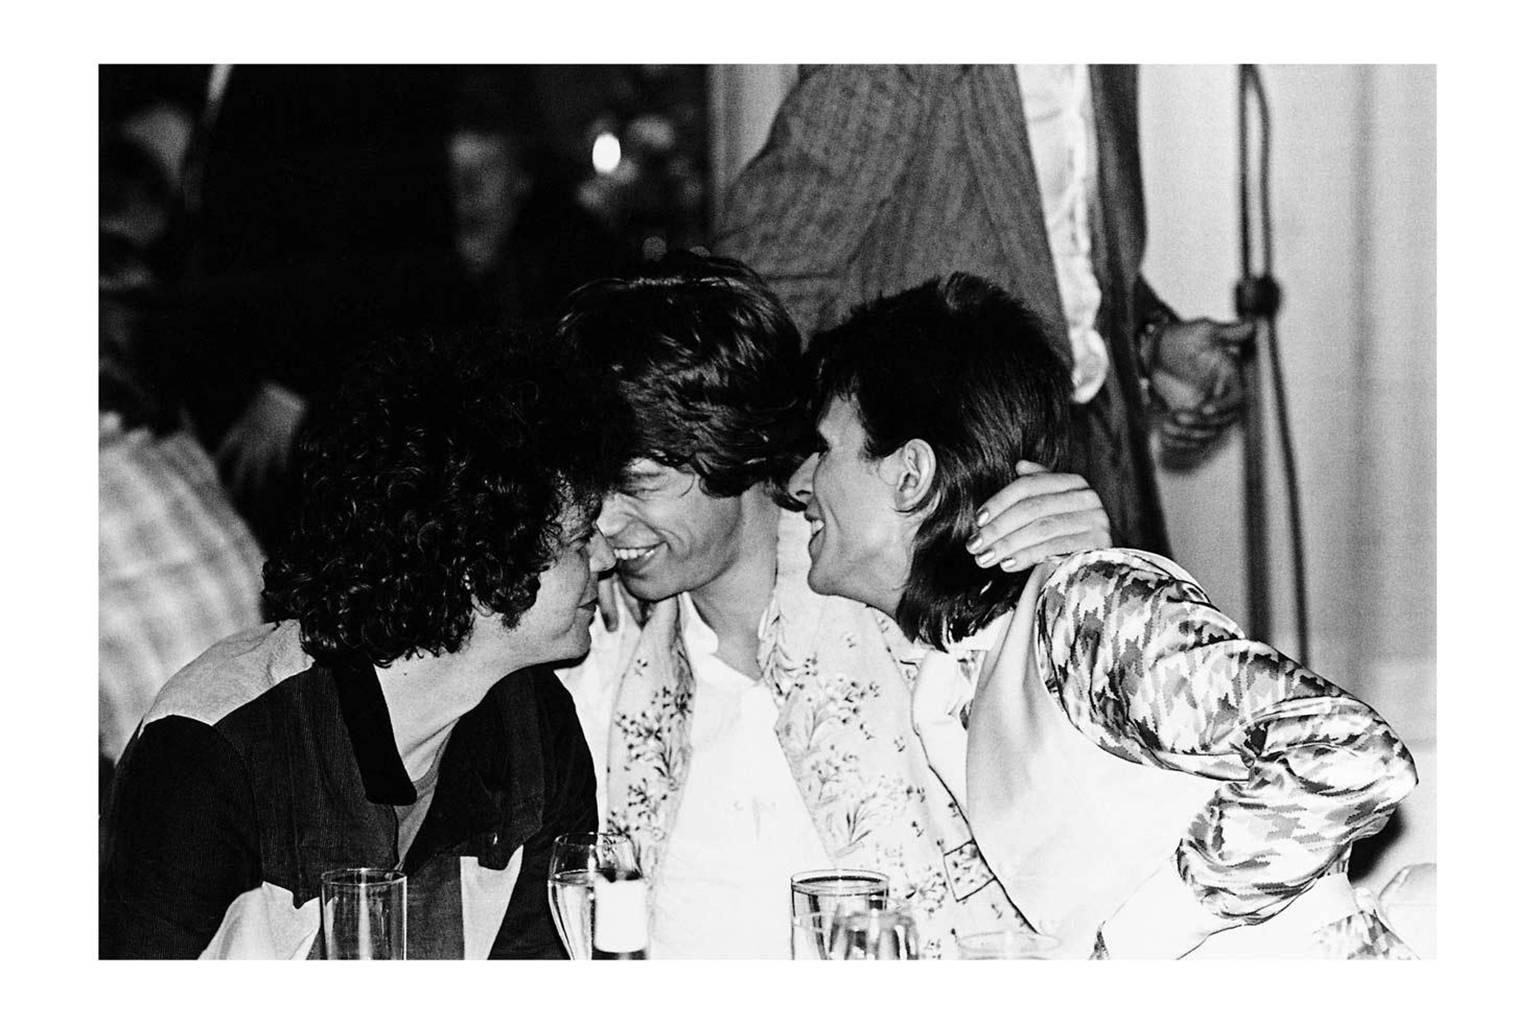 Mick Rock Black and White Photograph - Lou Reed, Mick Jagger, David Bowie, Cafe Royale, London 1973